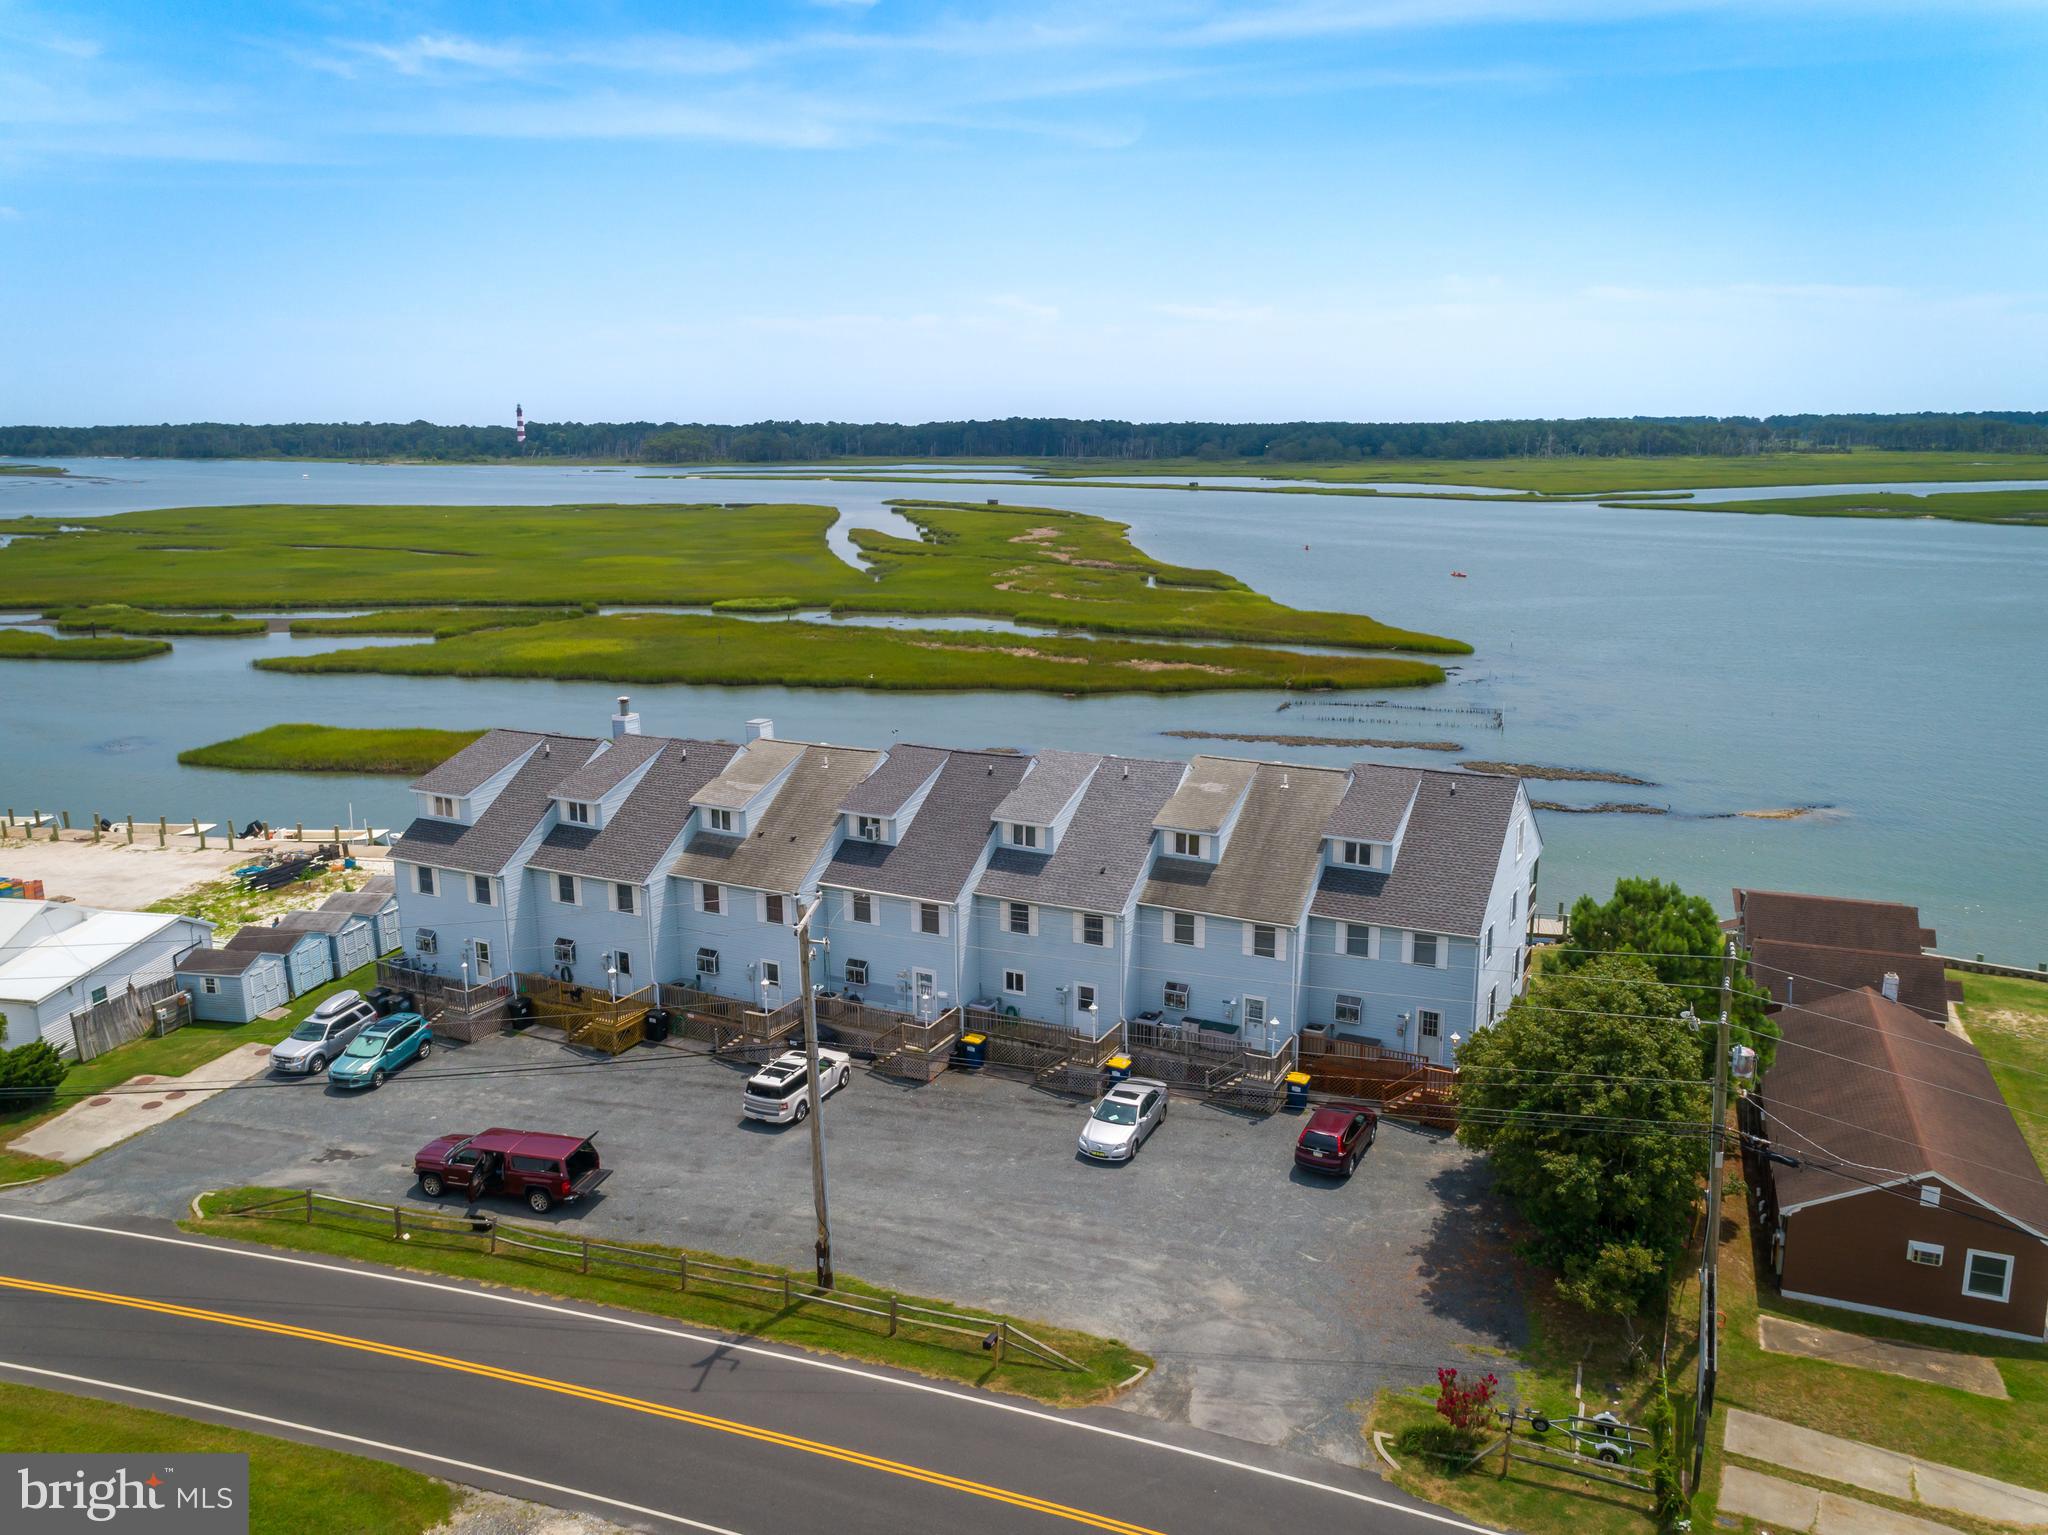 7548 East Side Road is a beautiful 3 story townhome with a deep water dock, overlooking Assateague I